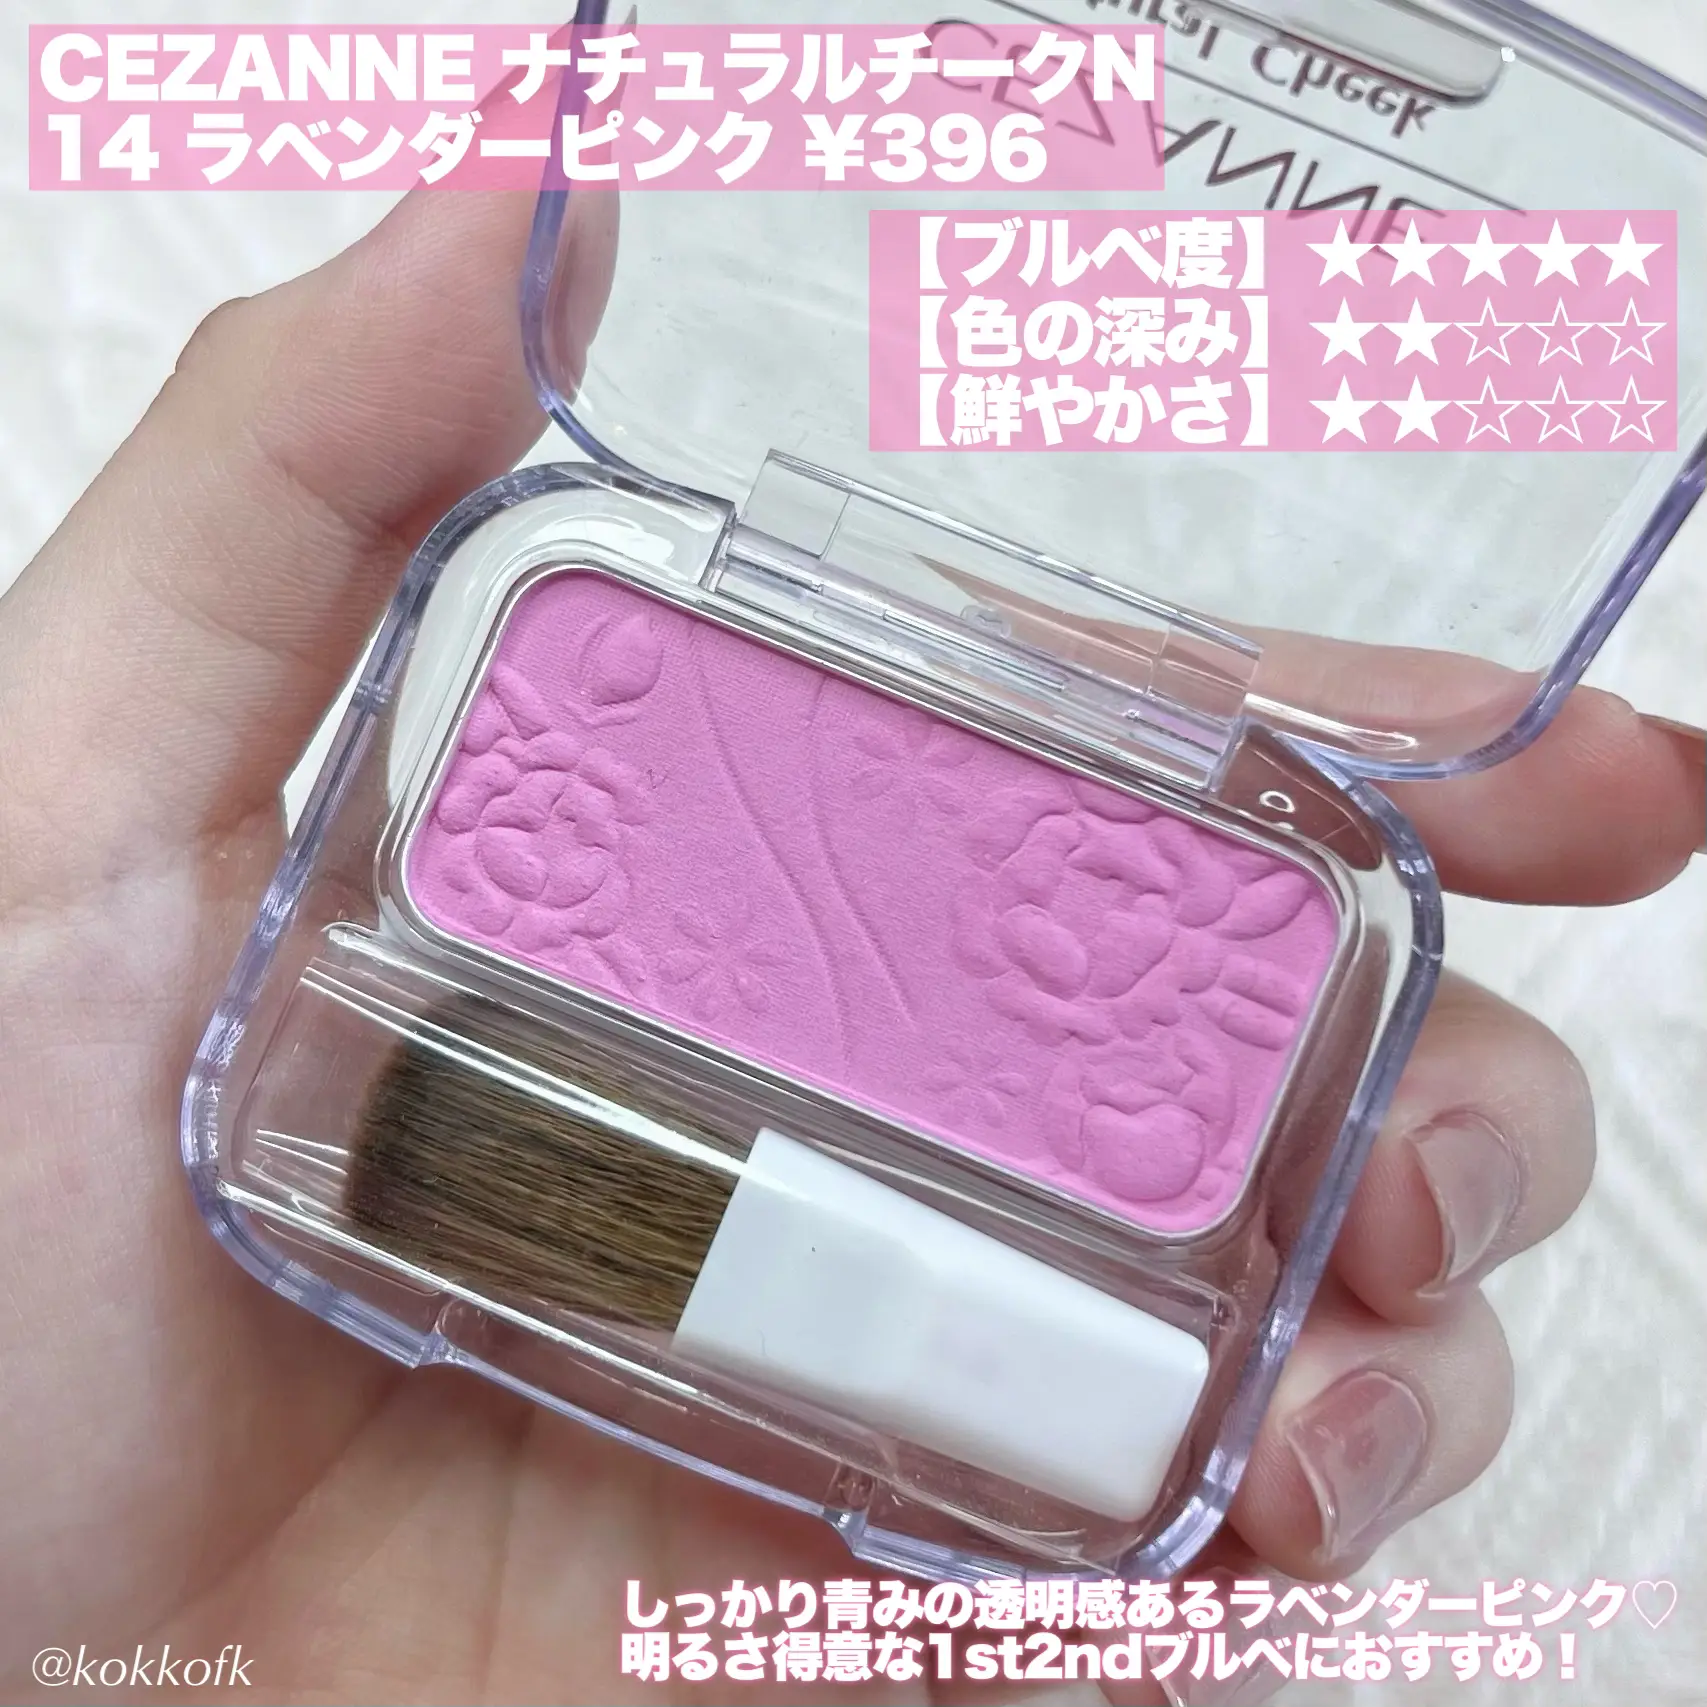 Cosme otaku collected cool tone blush 8    /   Gallery posted by